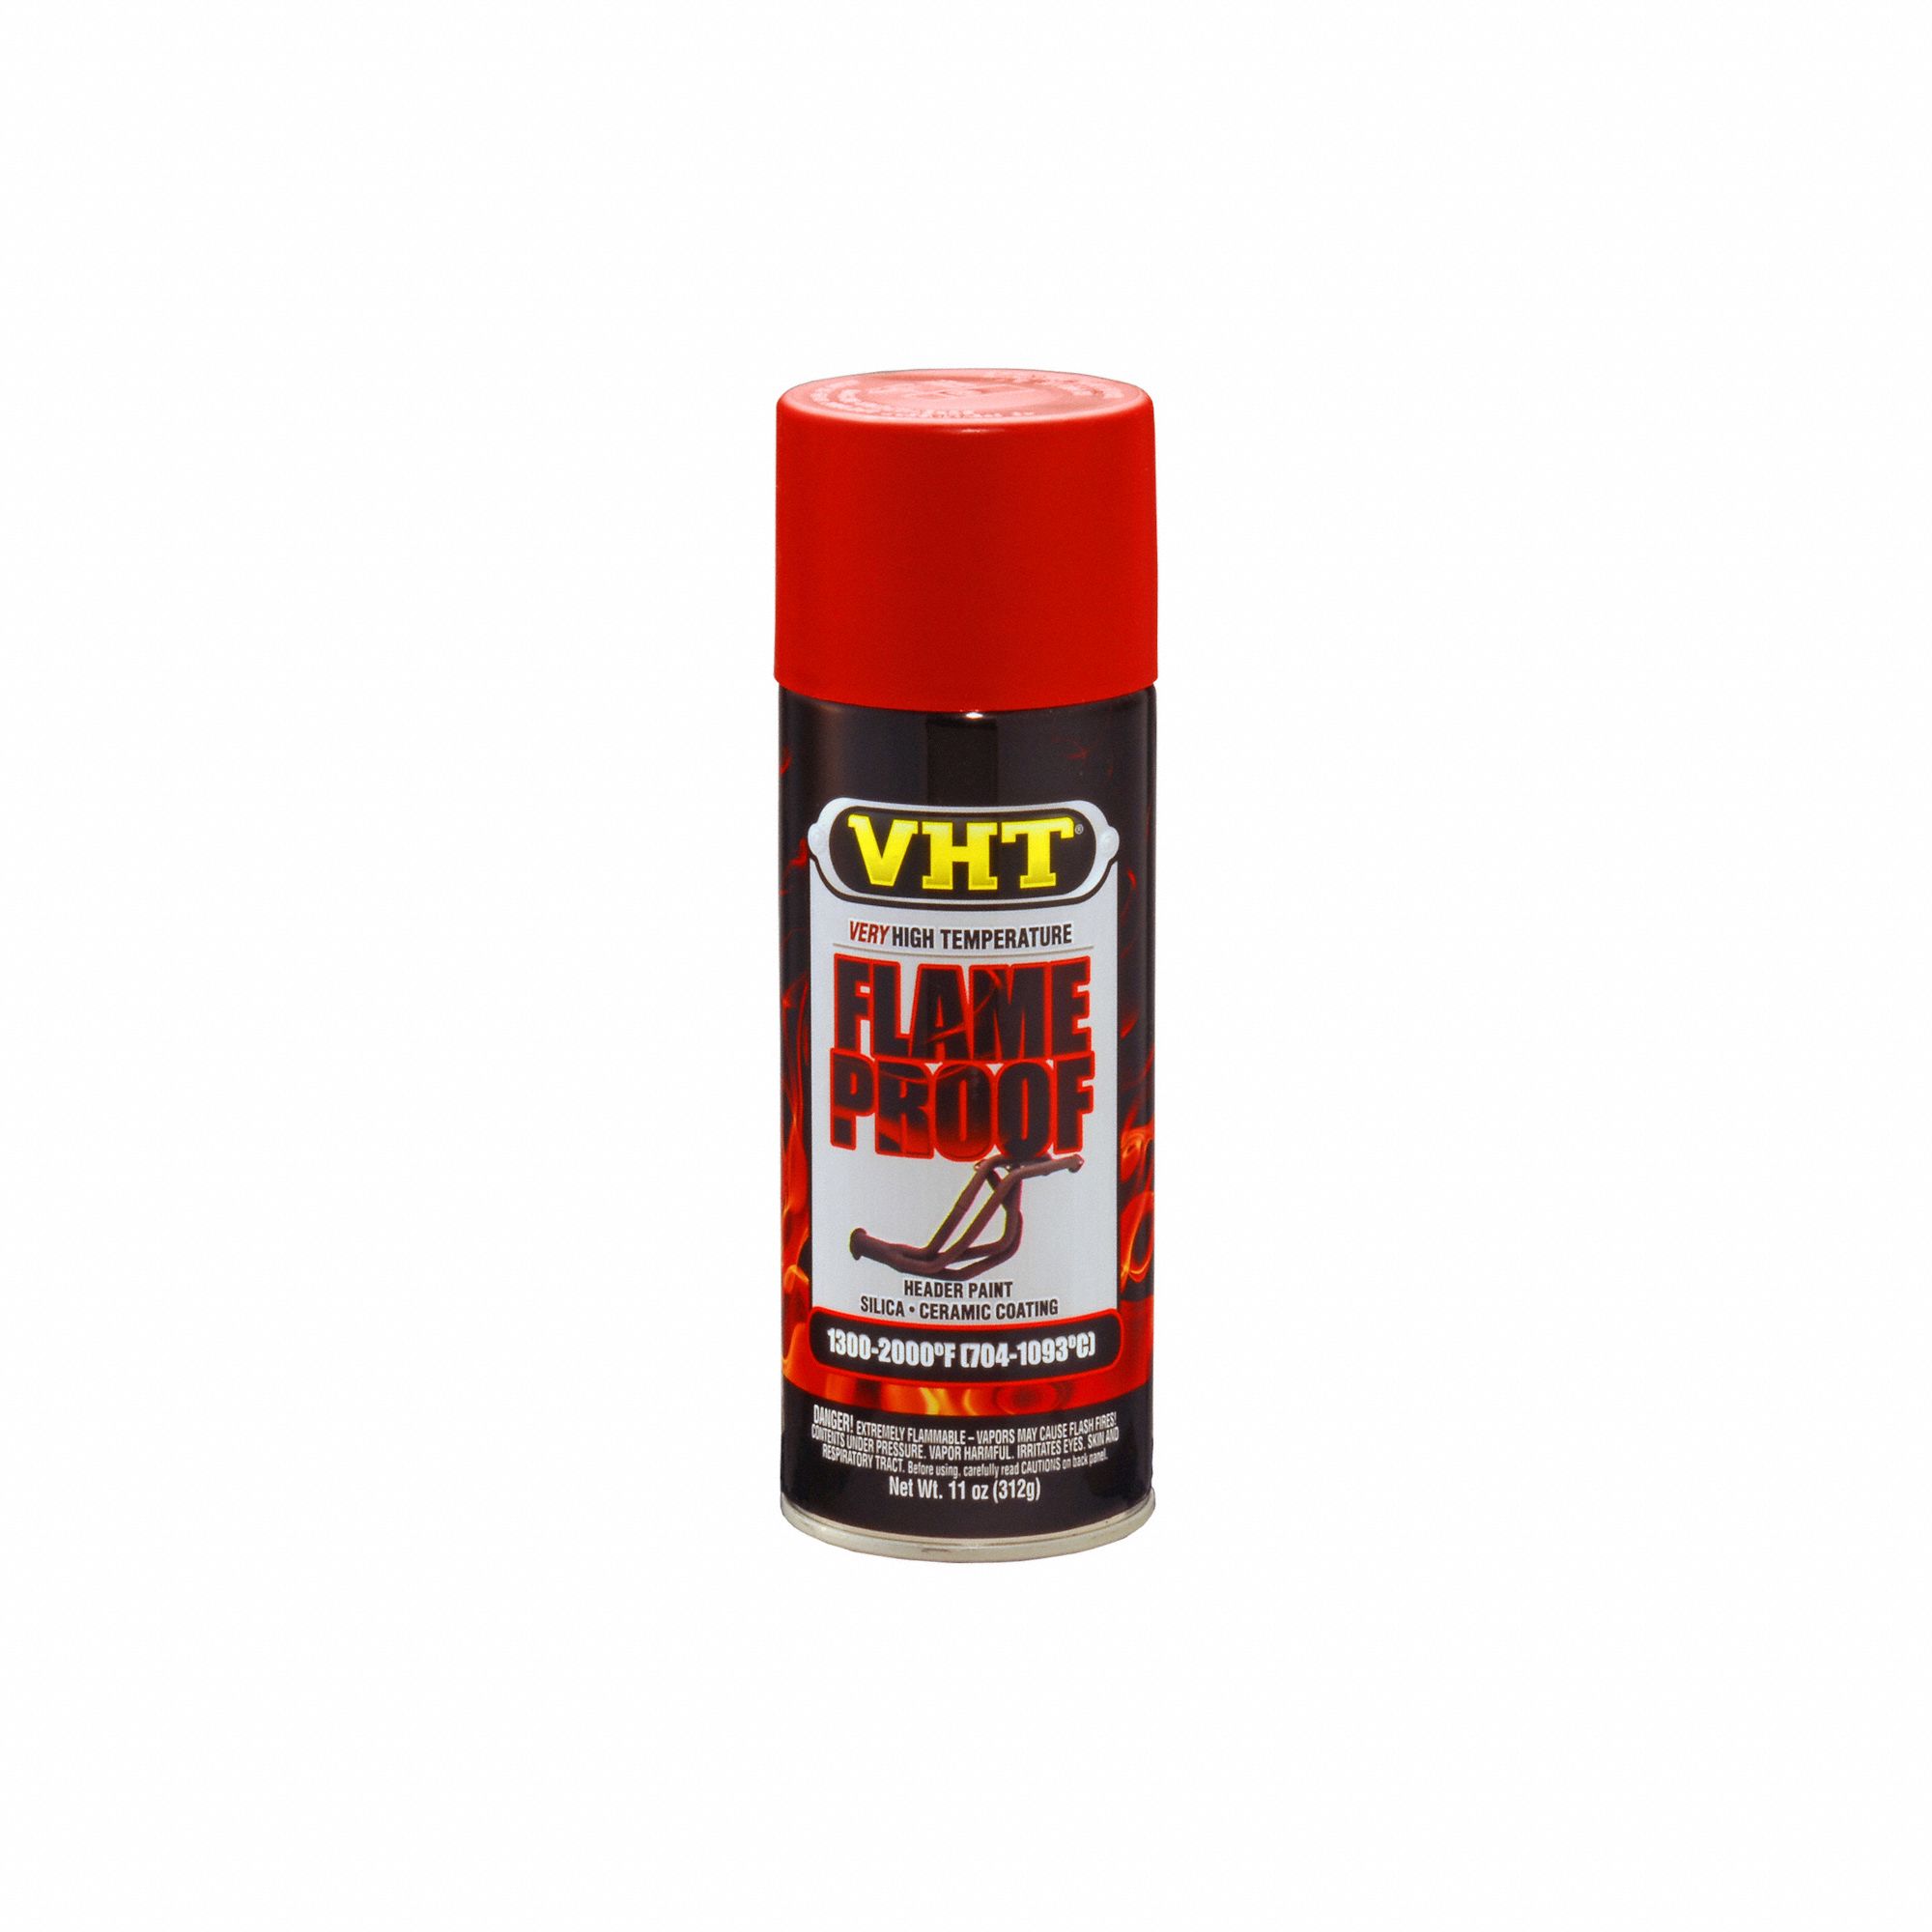 Flameproof Coating: Steel/Metal, Solvent, Red, 11 oz Container, Flameproof